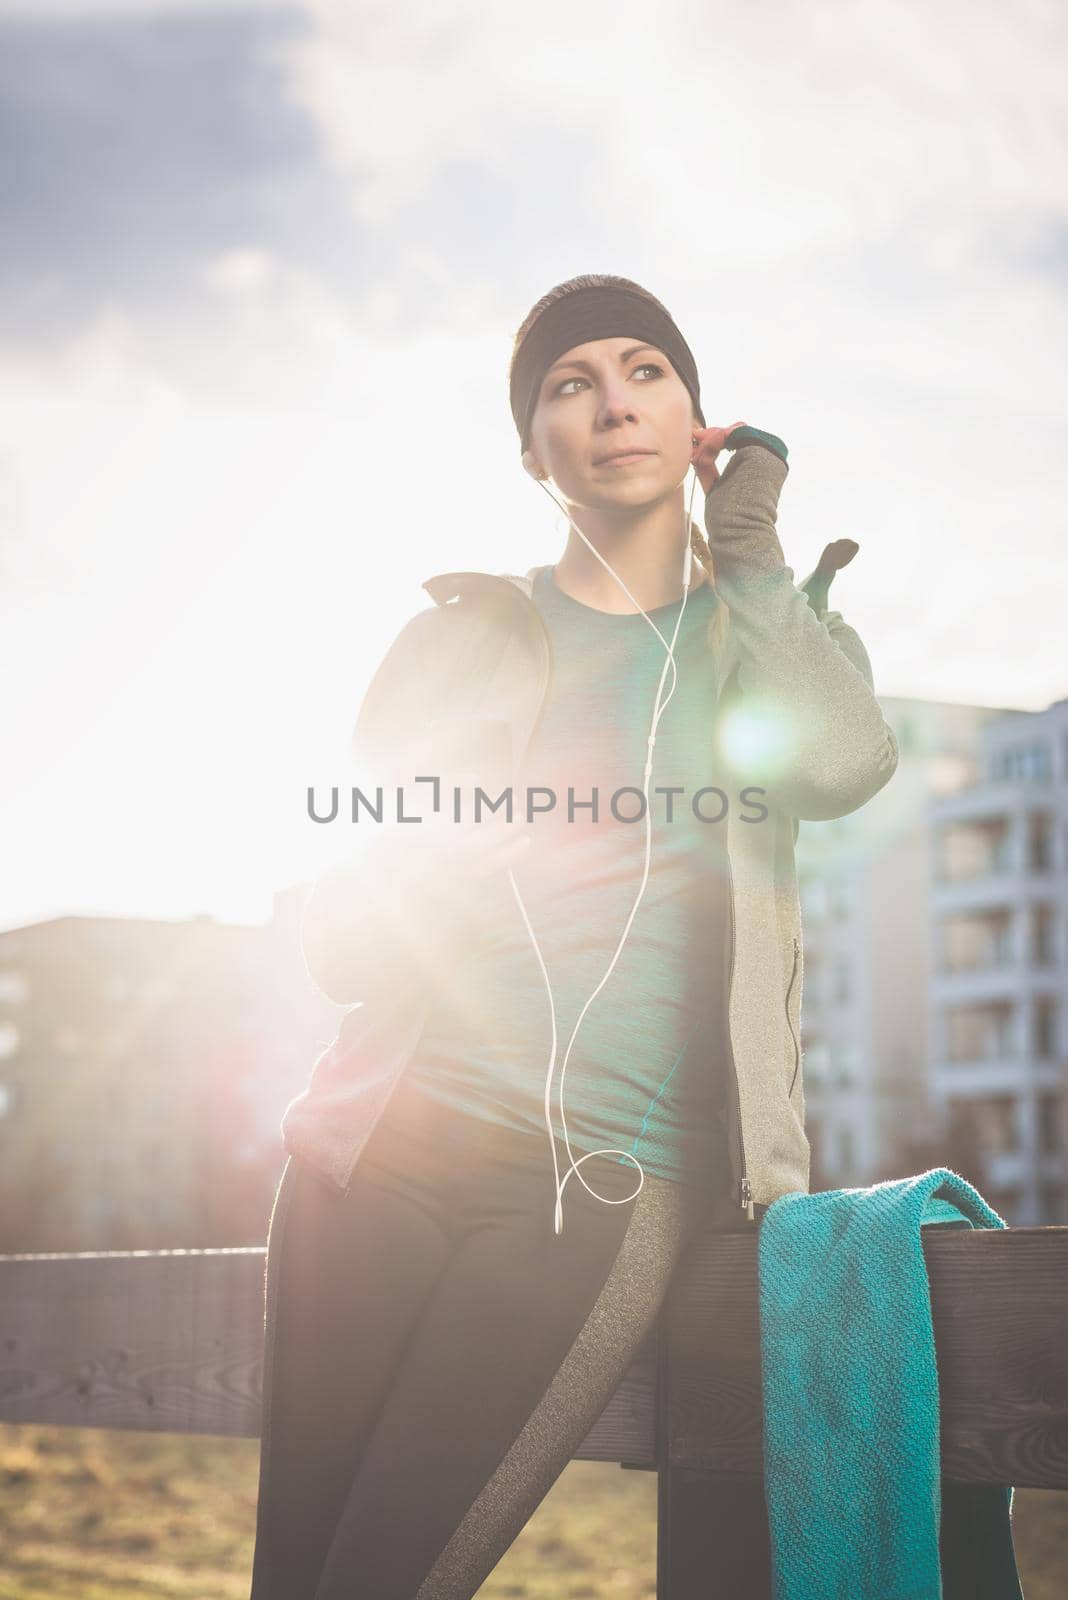 Portrait of young woman ready for outdoor workout listening to music through in-ear headphones connected to the mobile phone